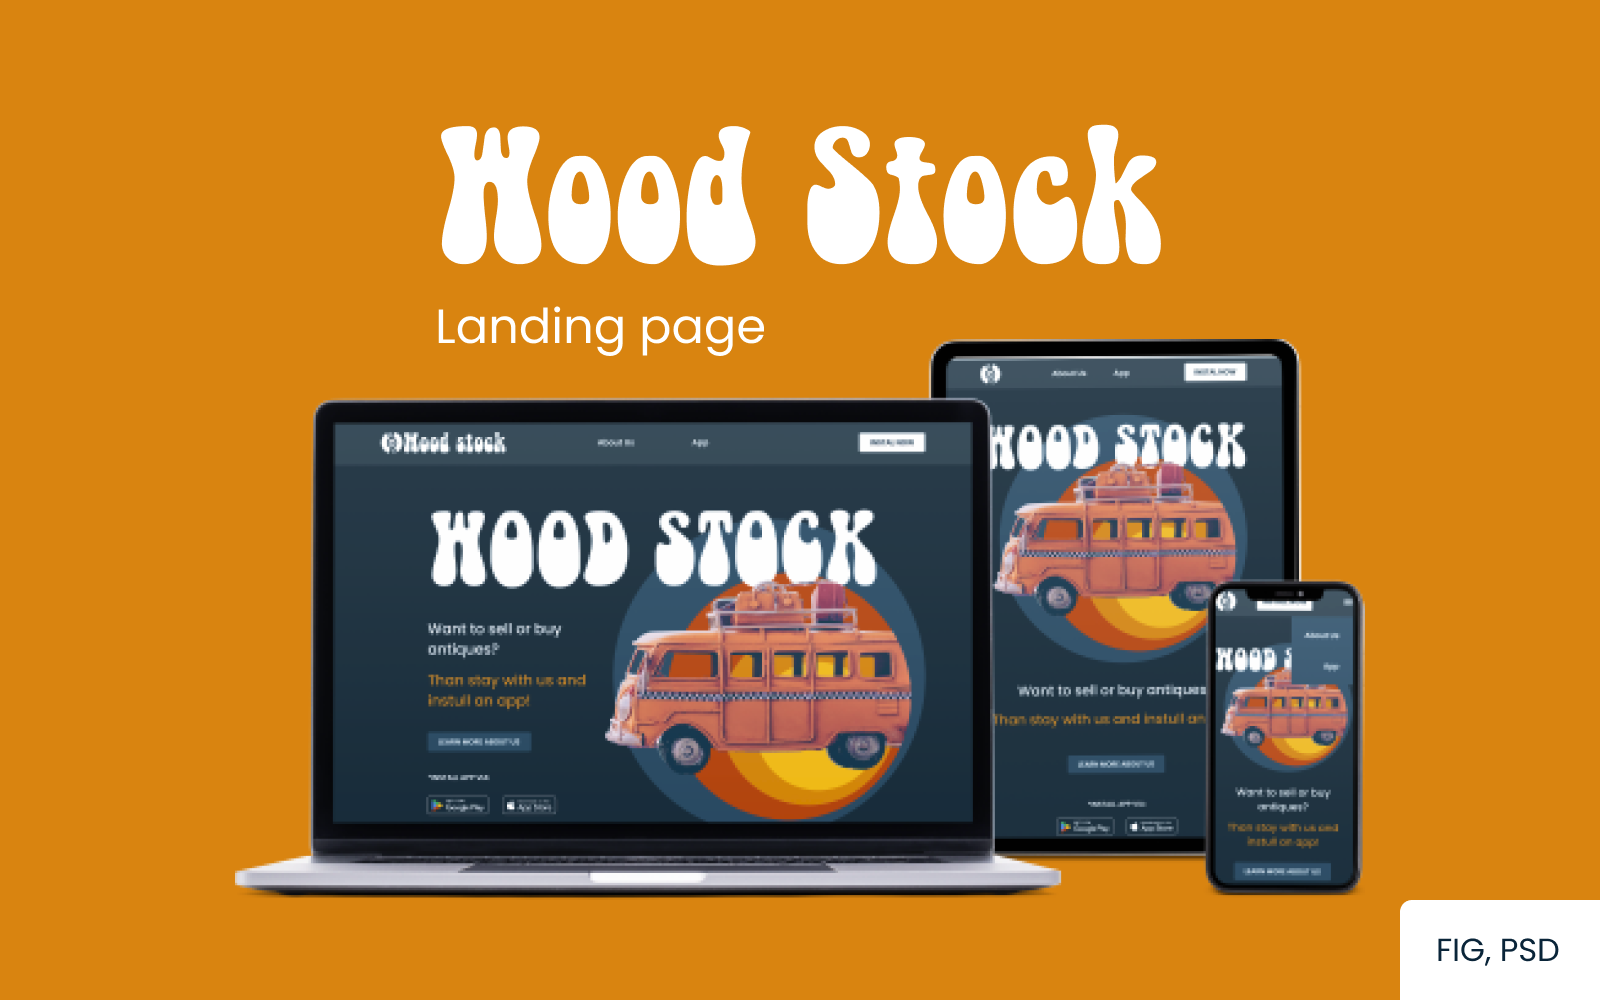 Wood Stock — Retro styled Landing page